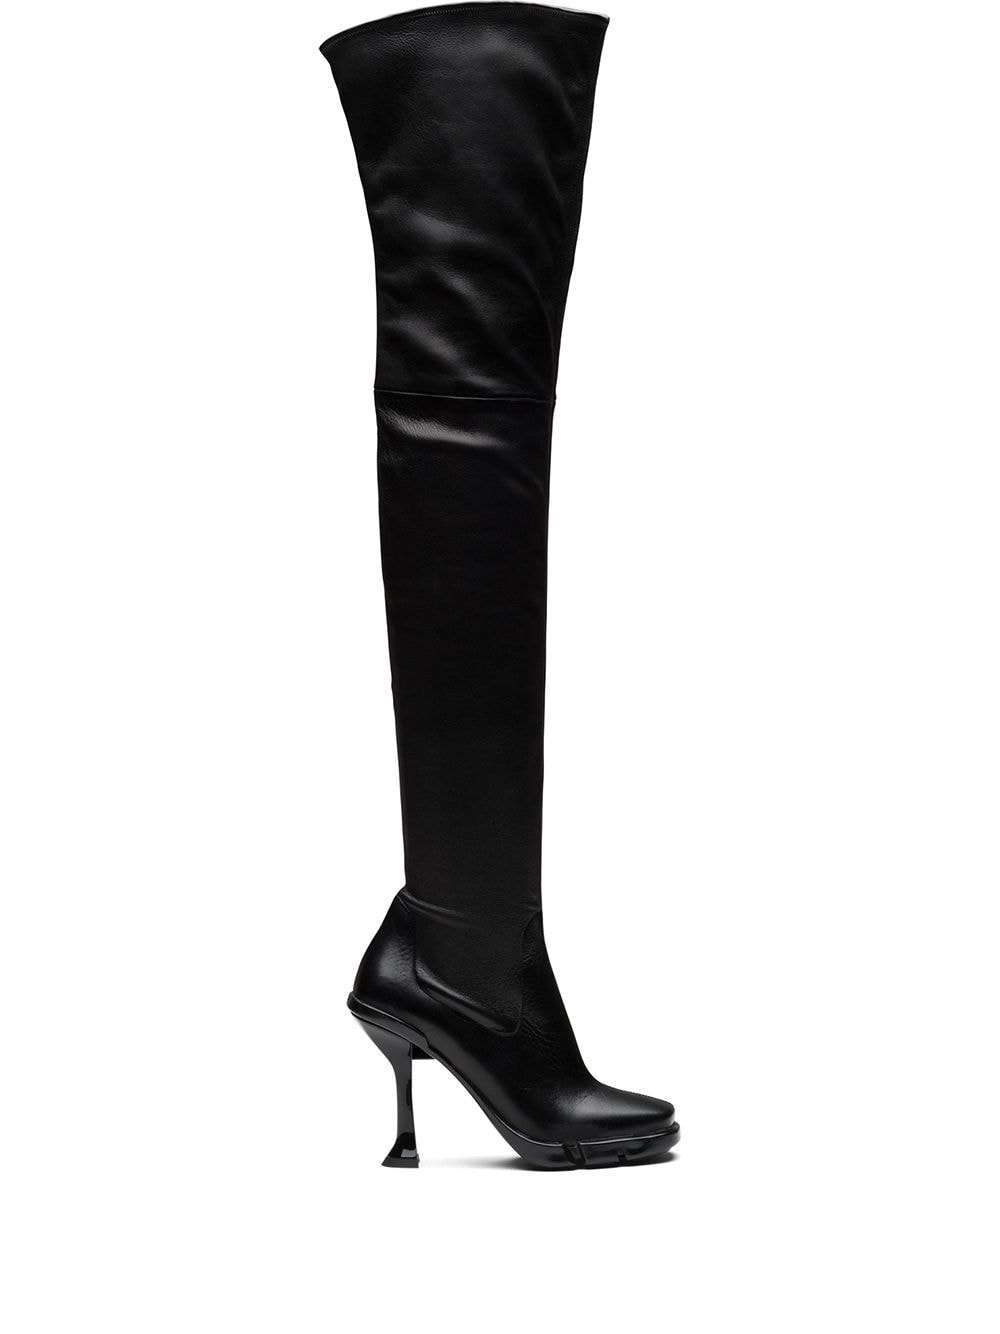 thigh high boots square heels